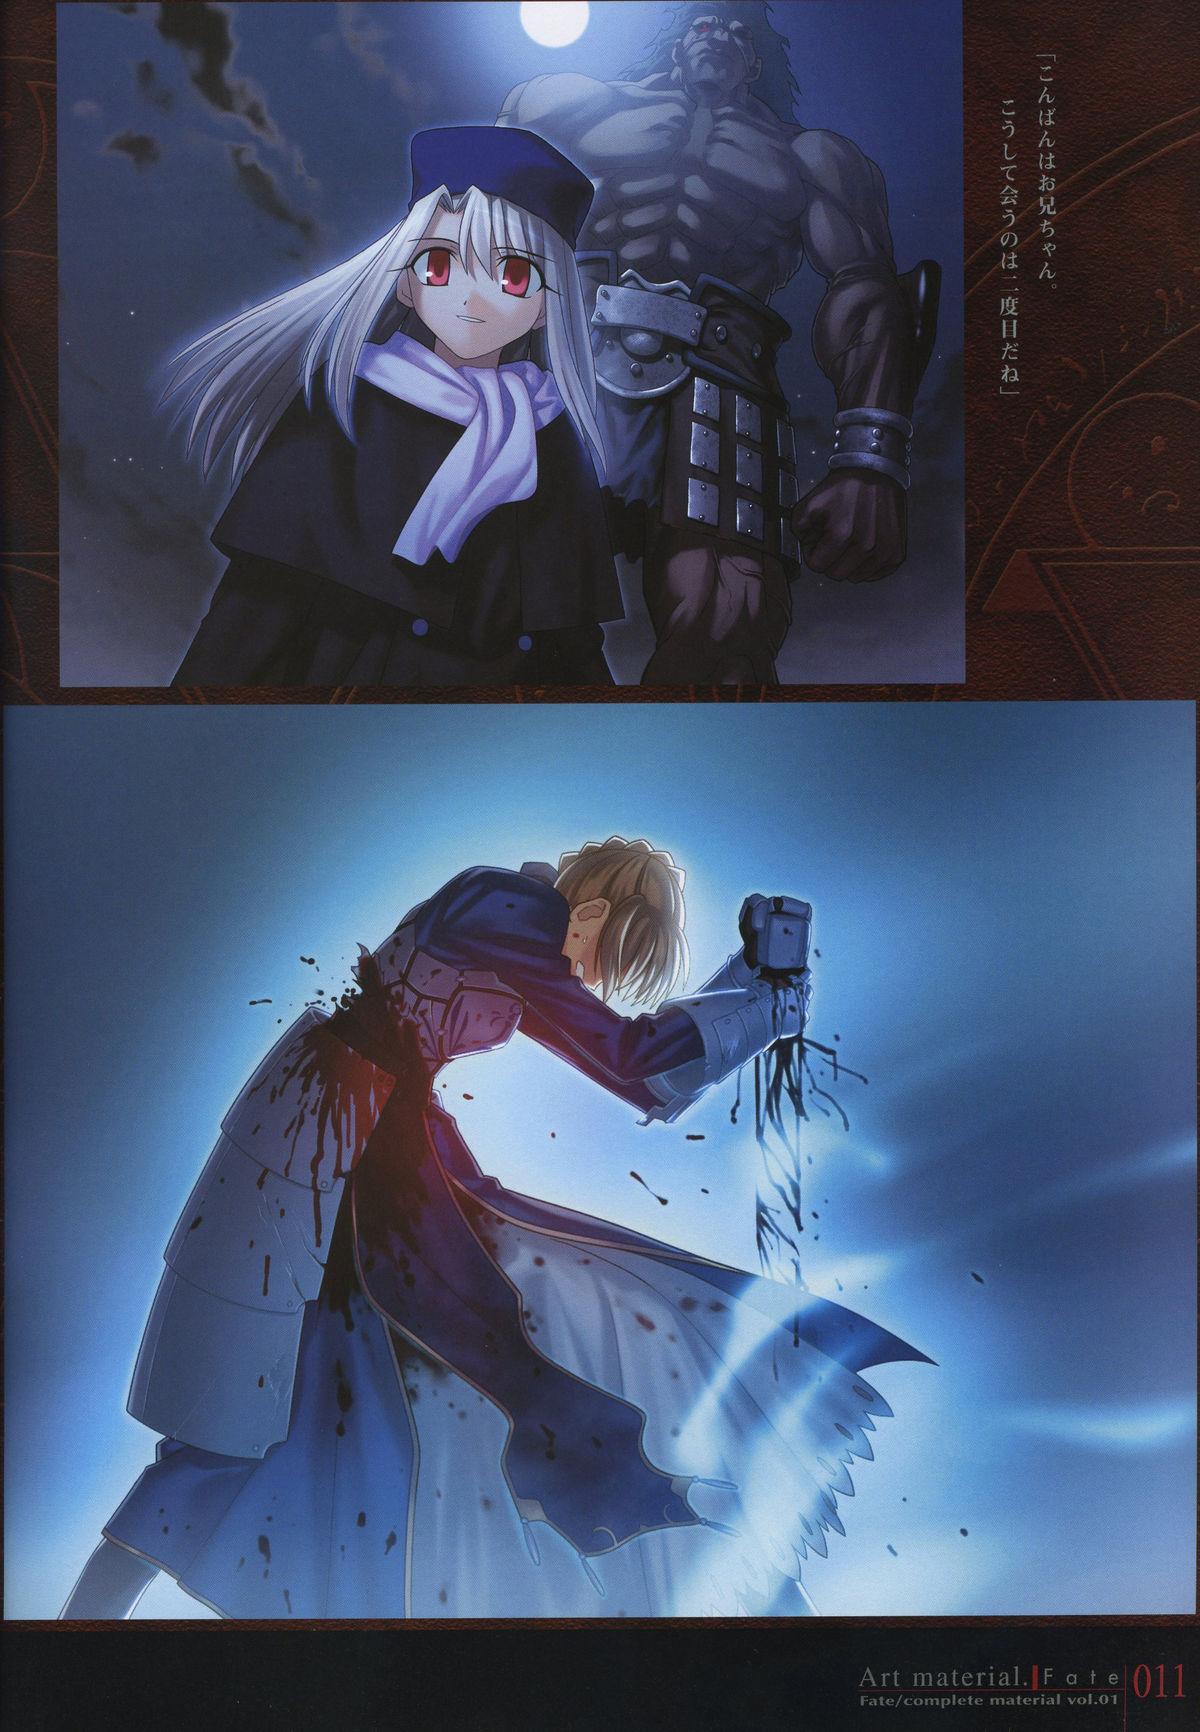 Fate/complete material I - Art material. 15